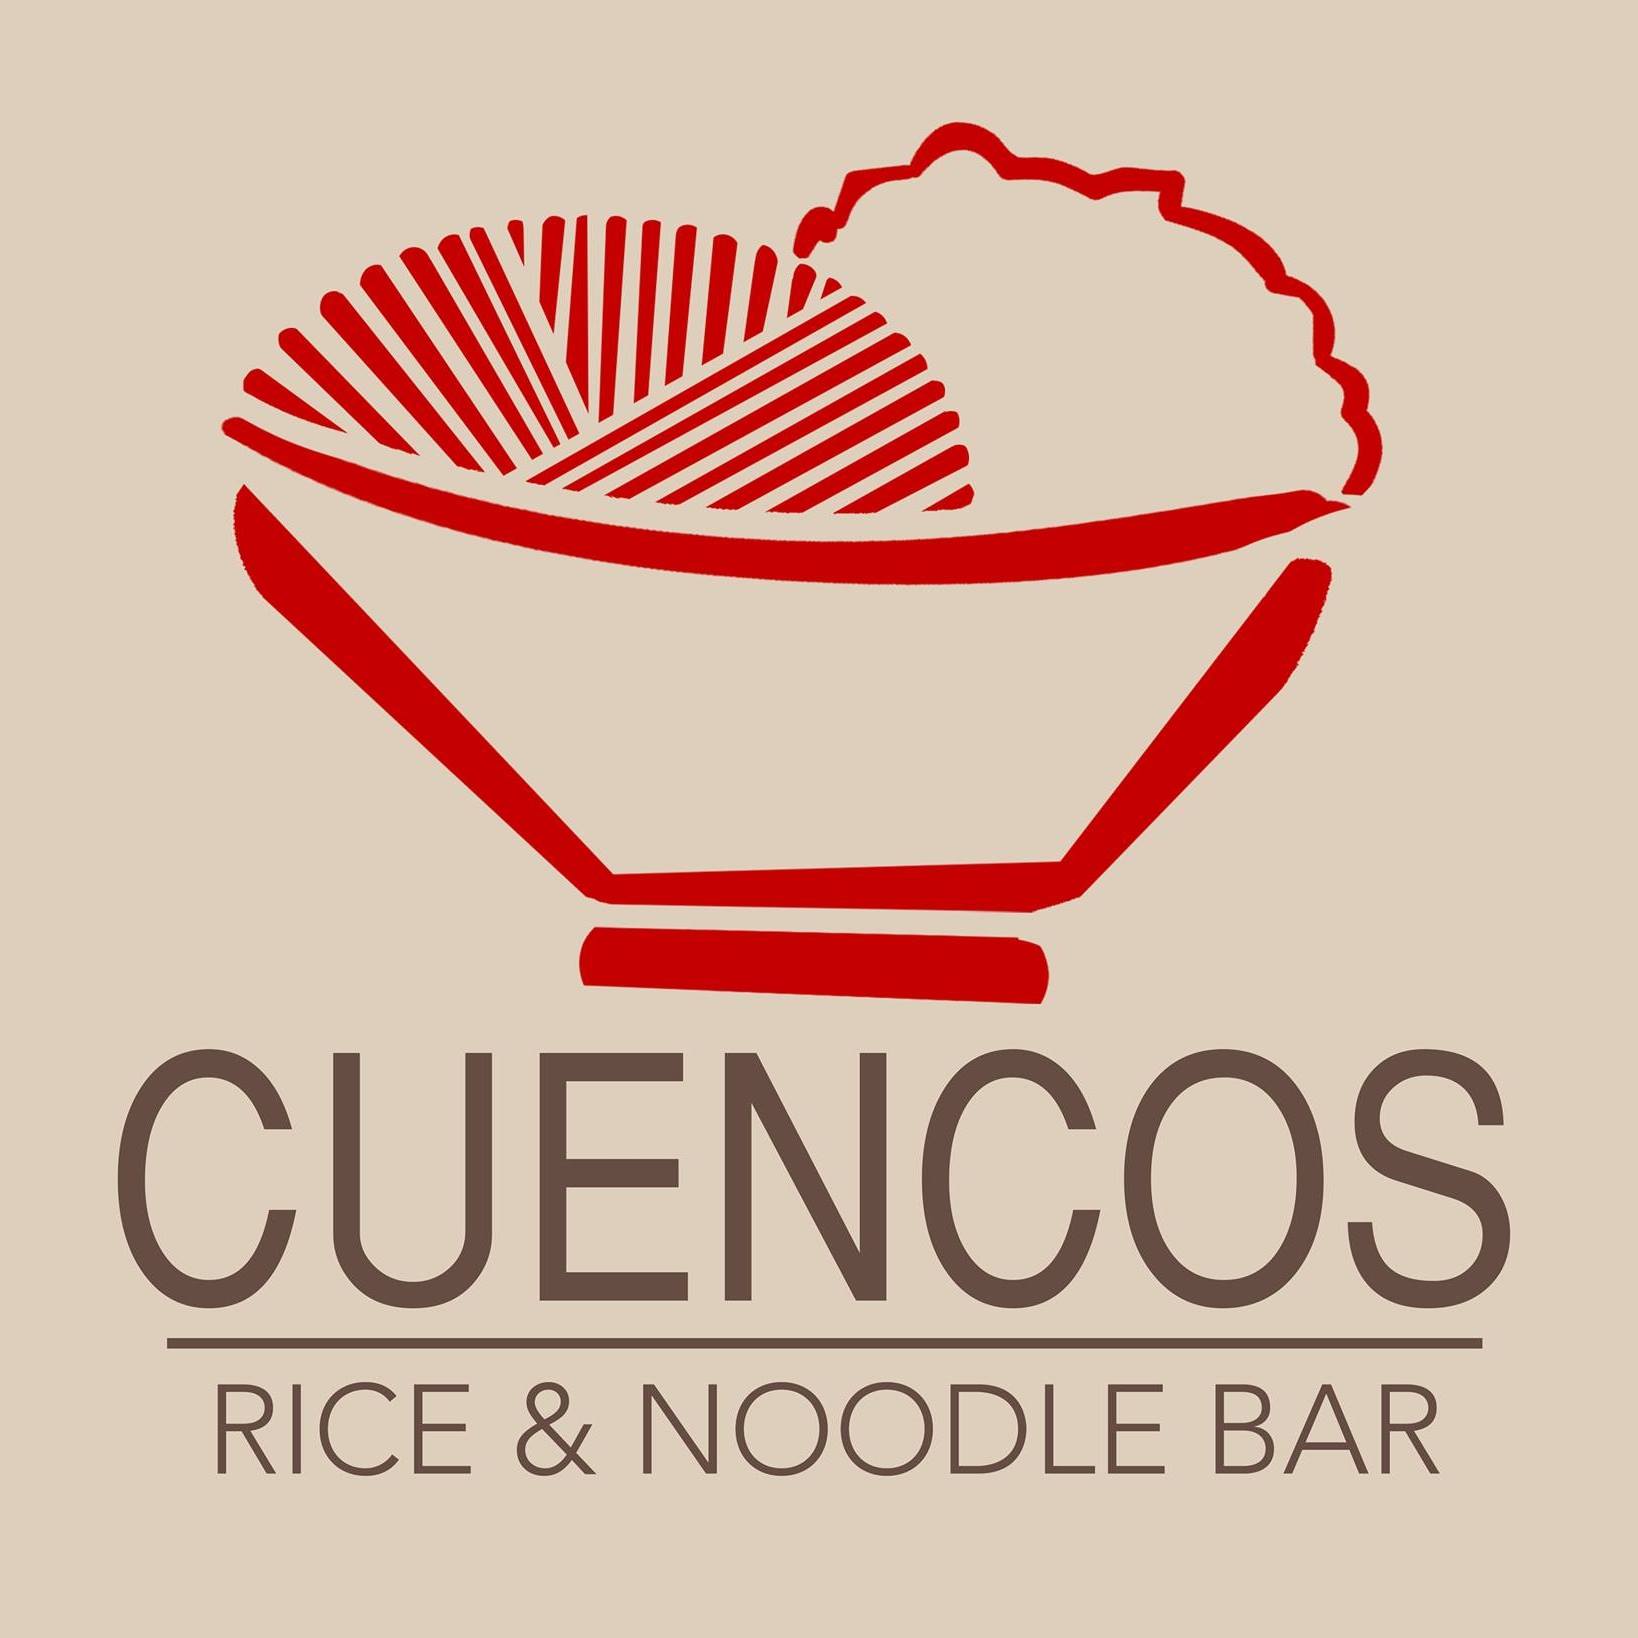 Cuencos Rice and Noodle Bar 1 PROFILE